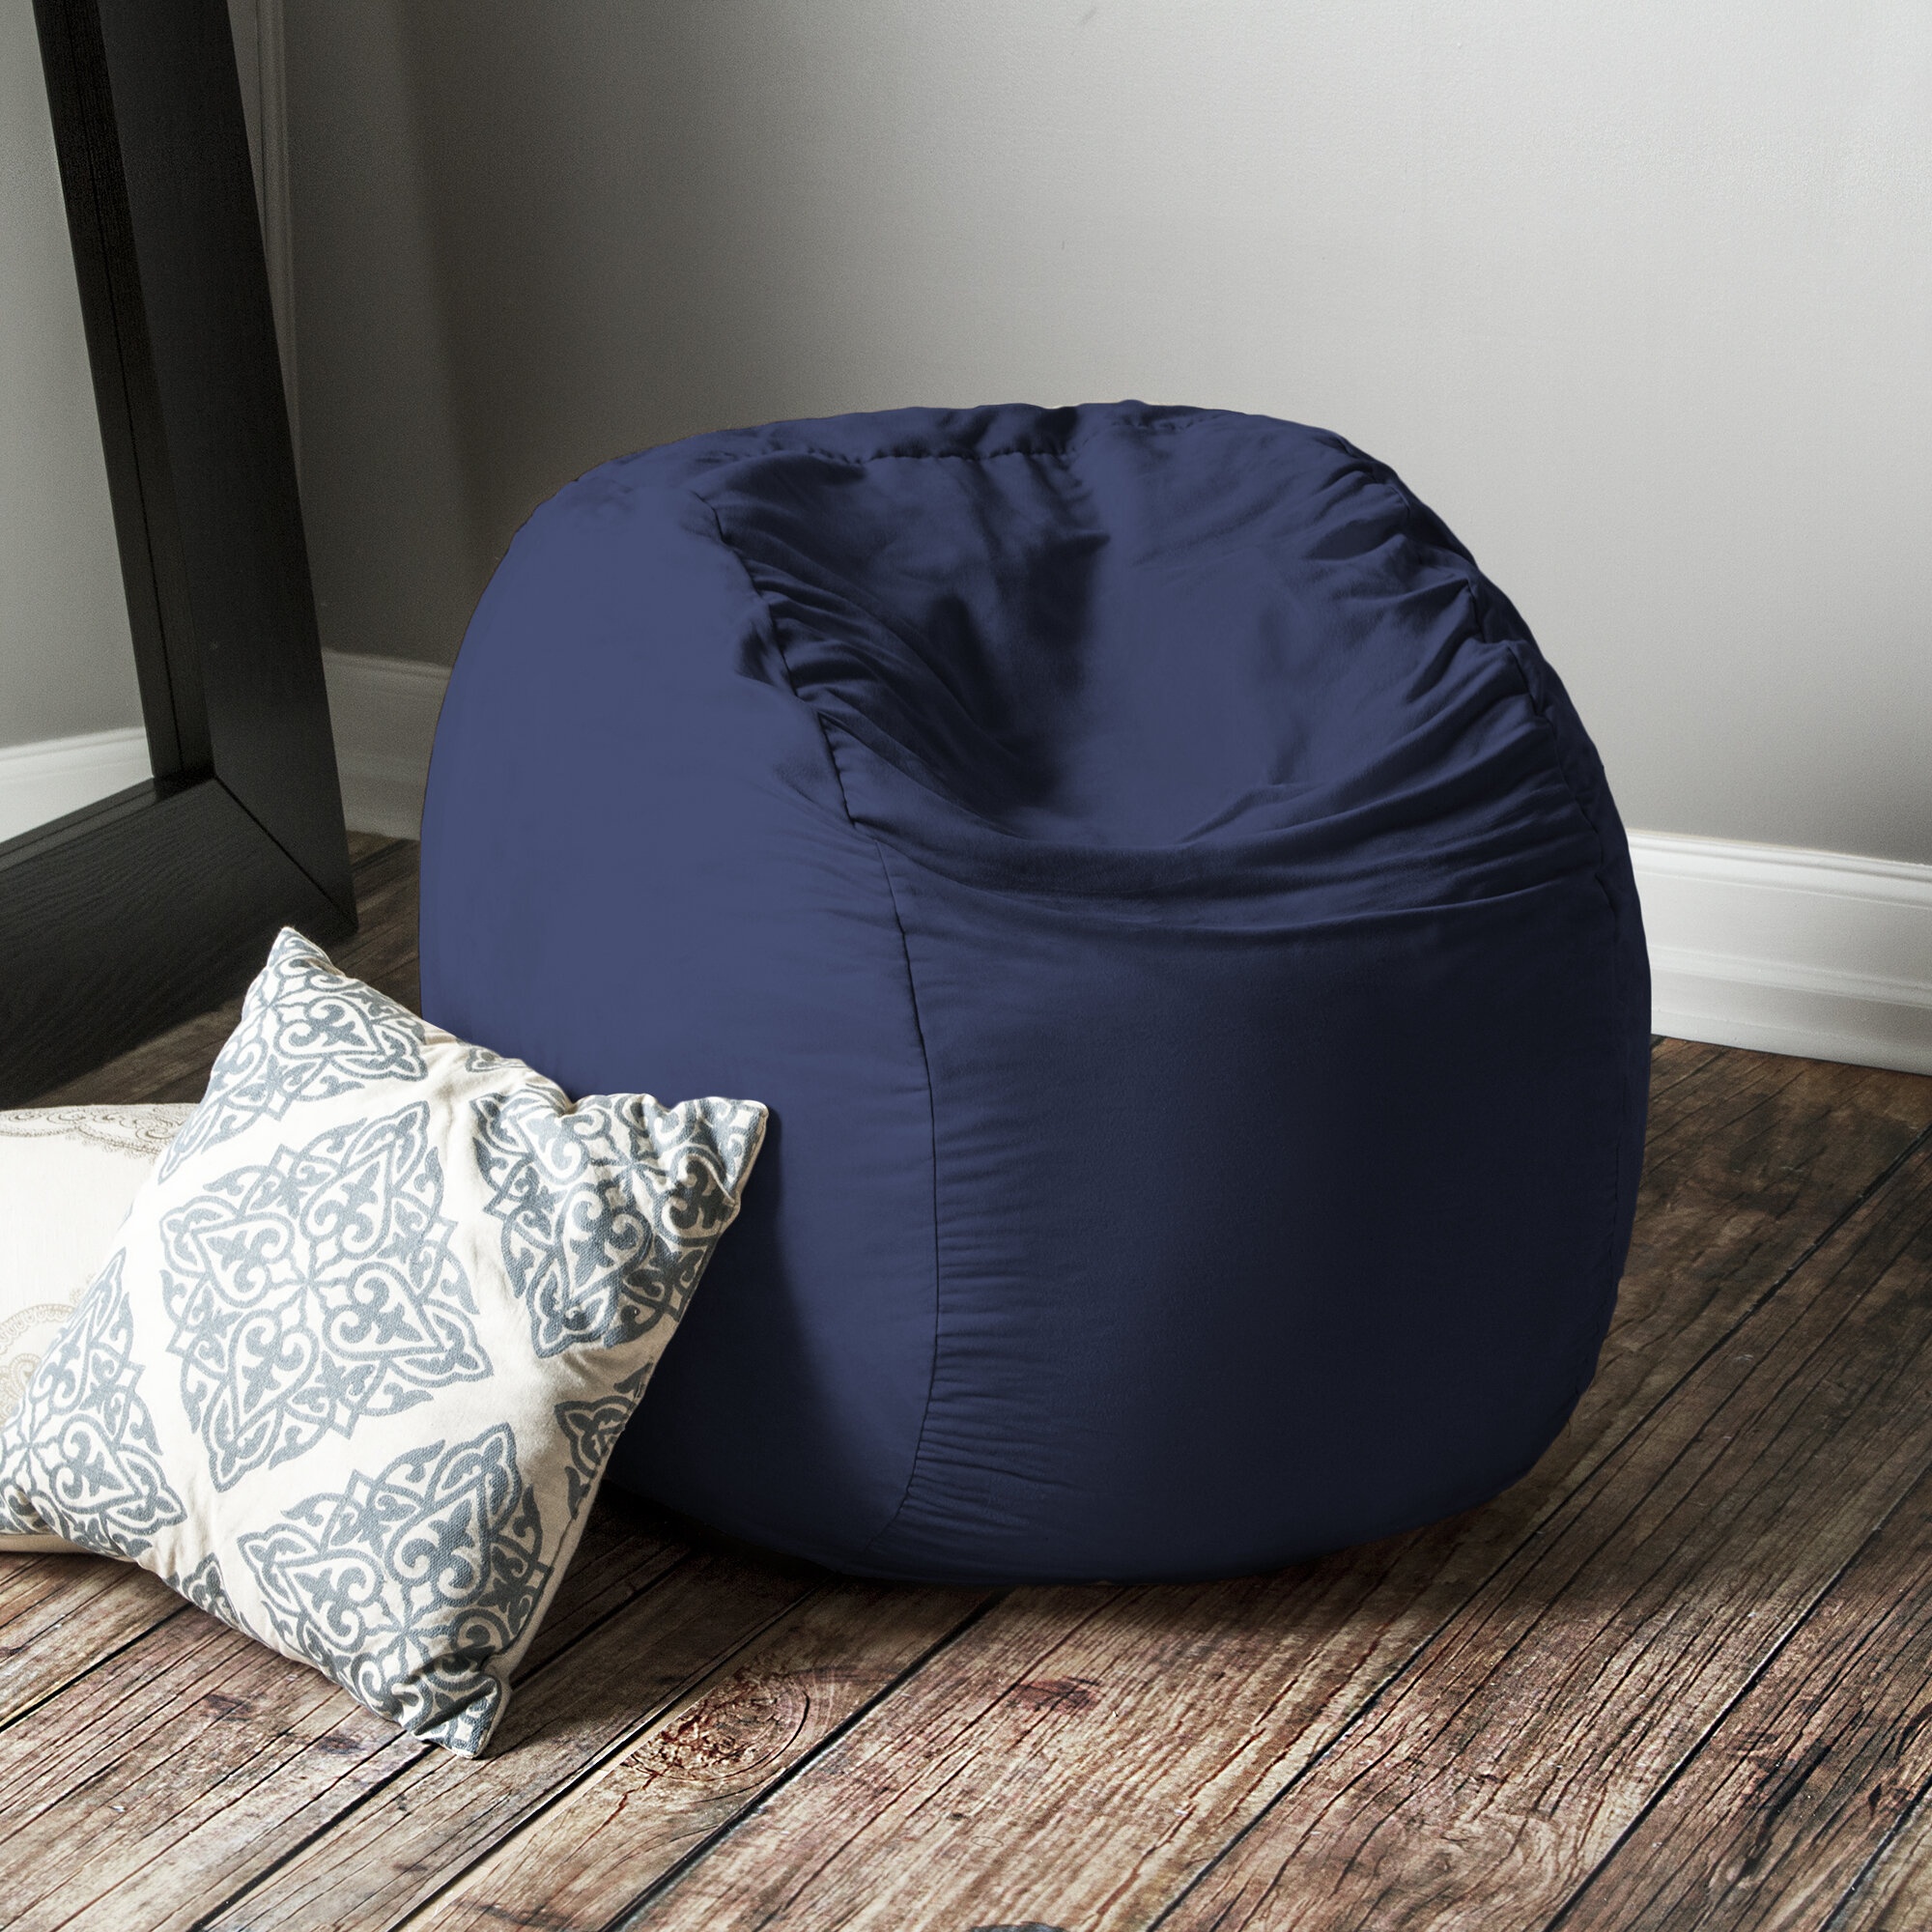 Sofa Sack - Plush Ultra Soft Bean Bags Chairs for Kids, Teens, Adults -  Memory Foam Beanless Bag Chair with Microsuede Cover - Foam Filled  Furniture for Dorm Room - Navy 5' : : Home